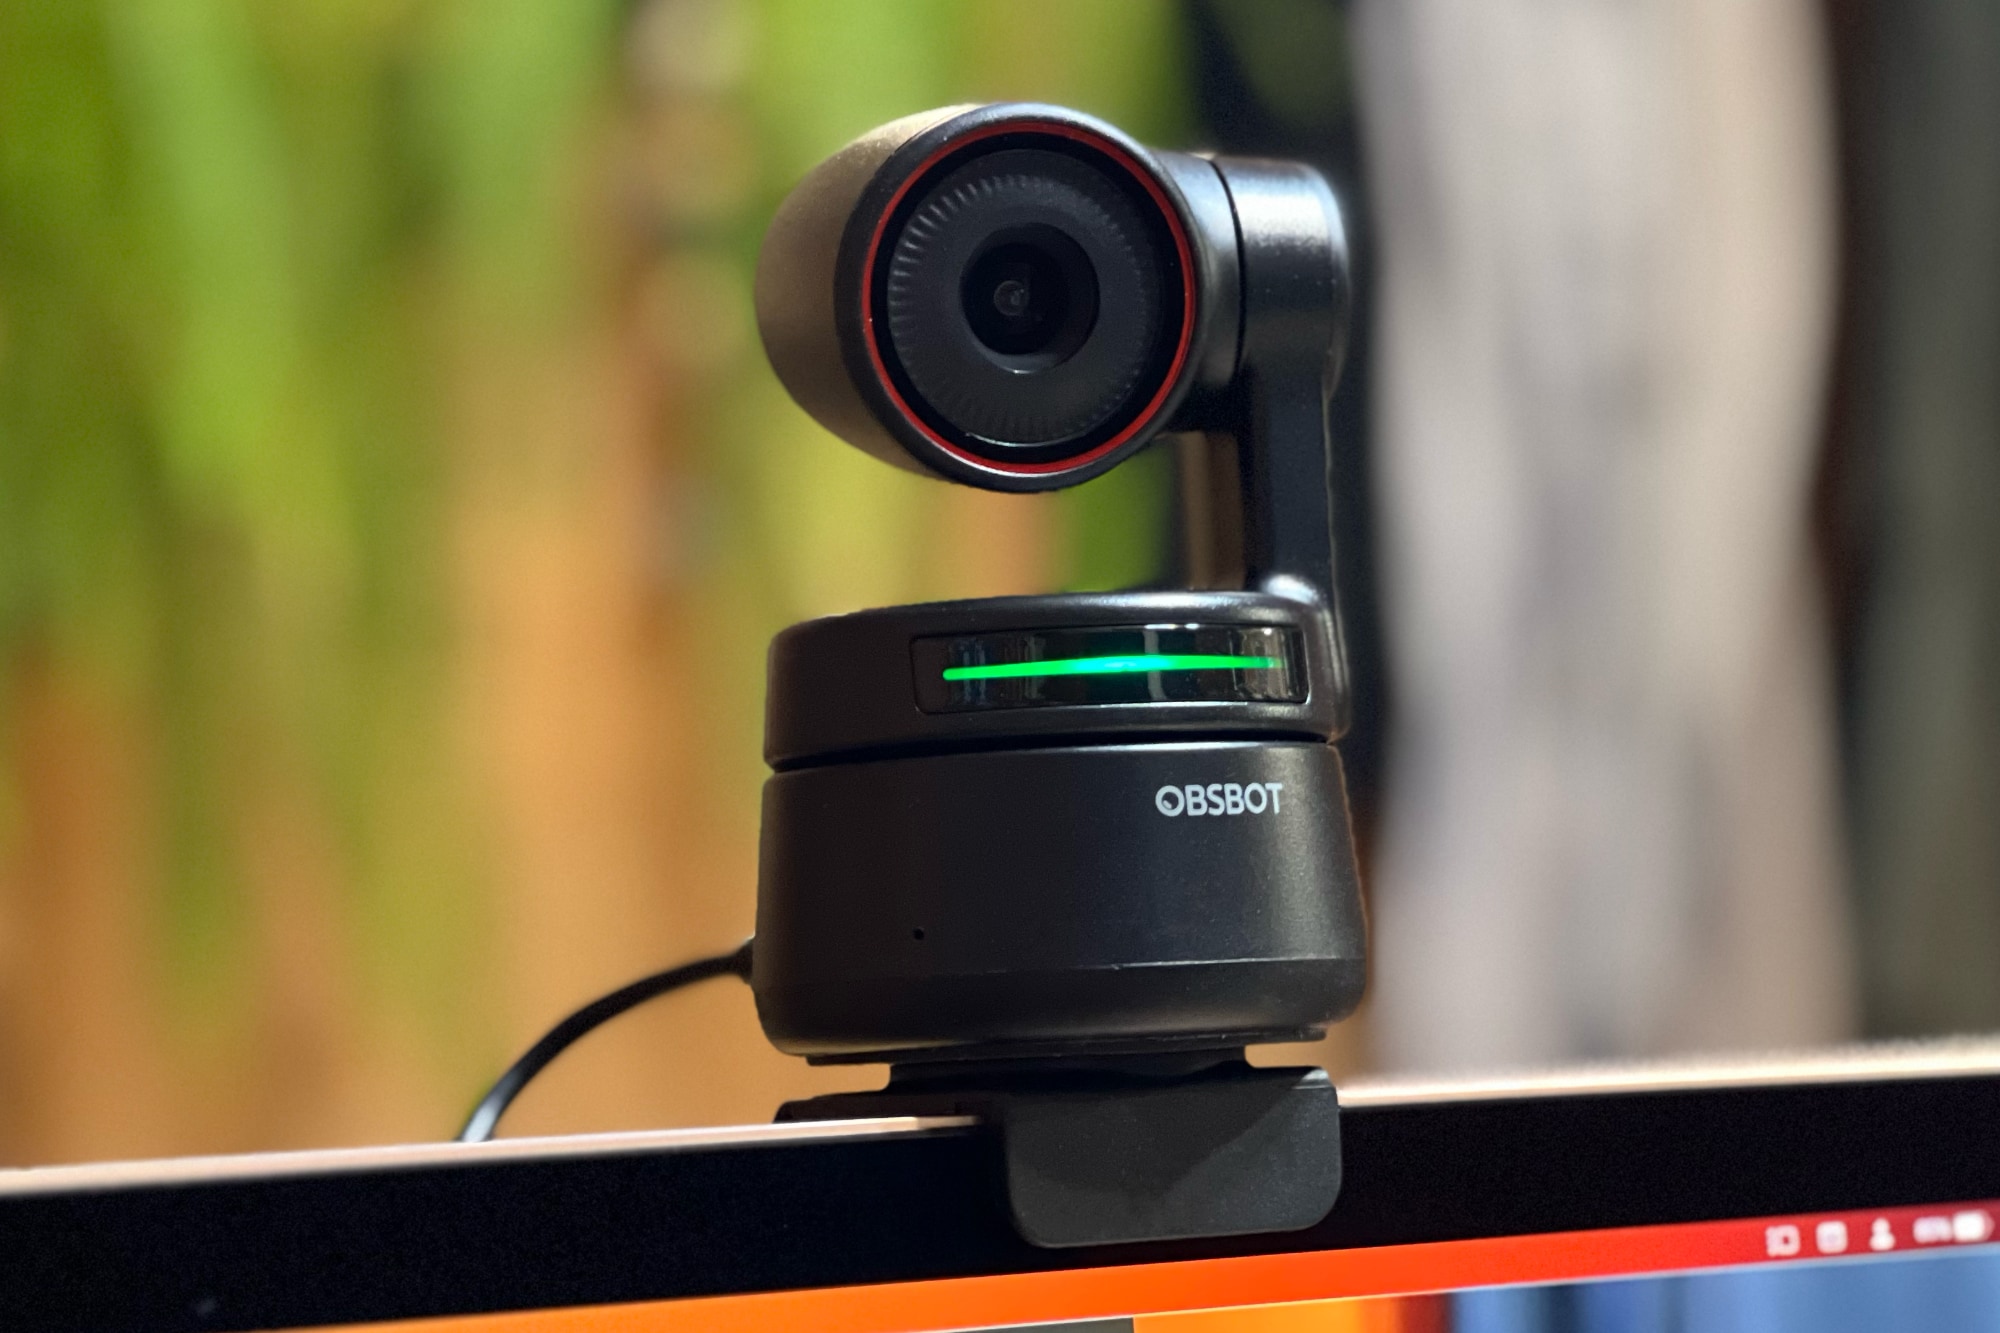 Here's a close-up of the Obsbot Tiny 4K webcam at resolution.